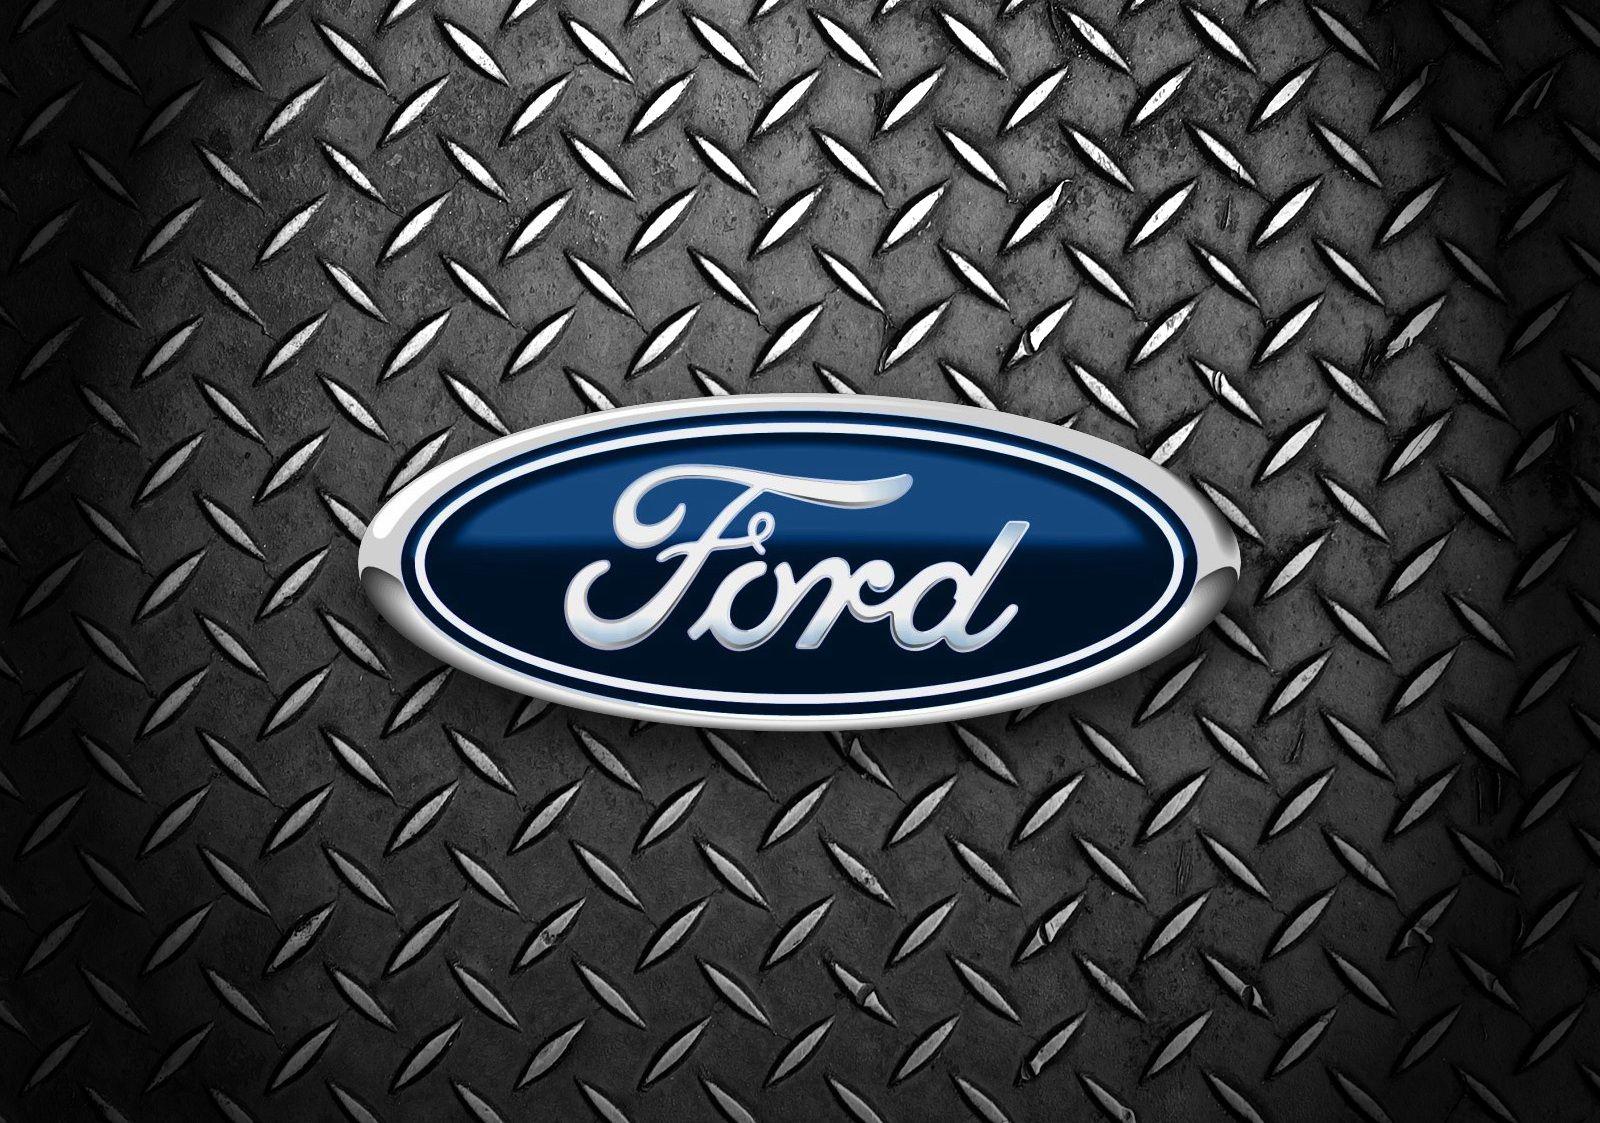 Ford Motor Company Logo - Ford Logo, Ford Car Symbol Meaning and History | Car Brand Names.com